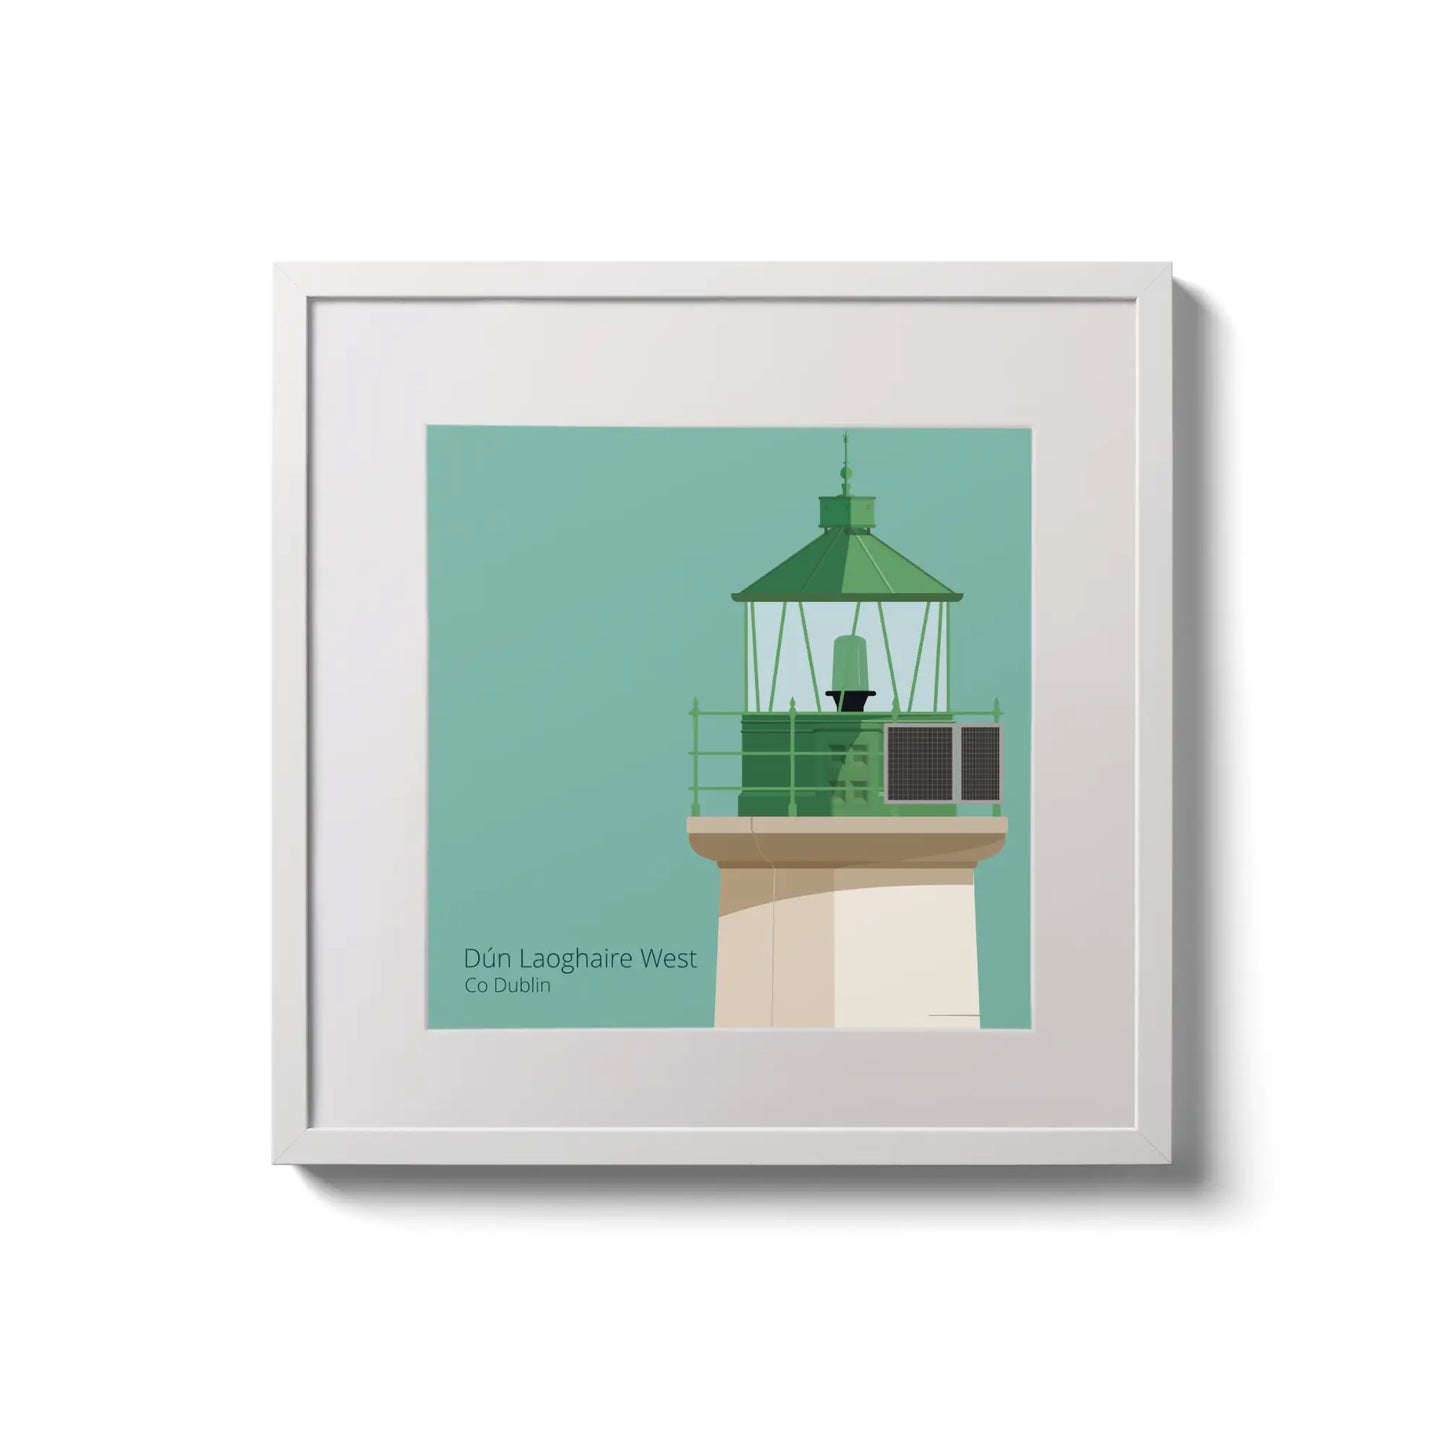 Illustration of Dún Laoghaire West lighthouse on an ocean green background,  in a white square frame measuring 20x20cm.